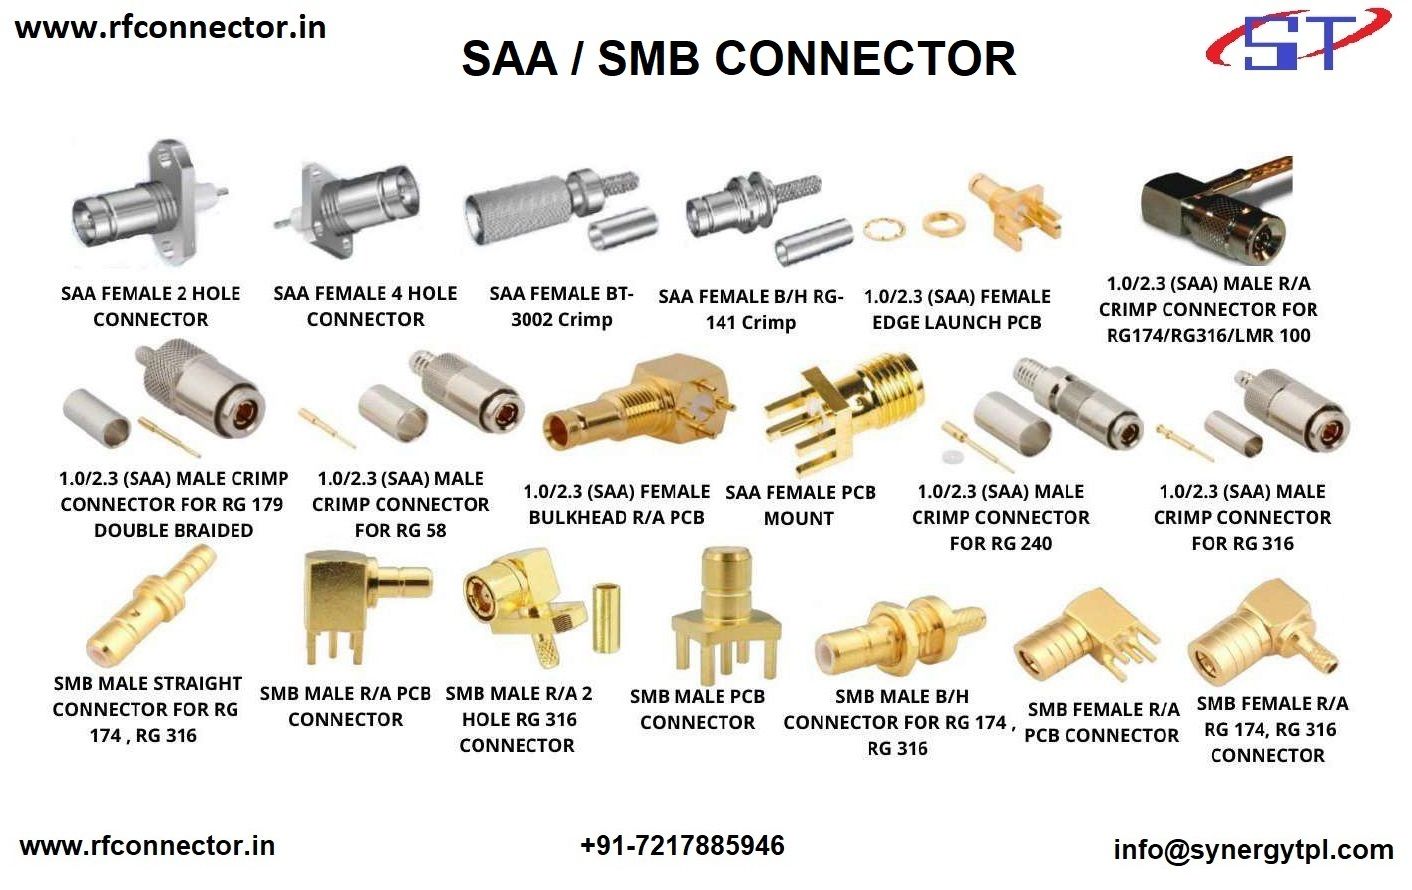 SAA male right angle crimp connector for BT 3002 cable